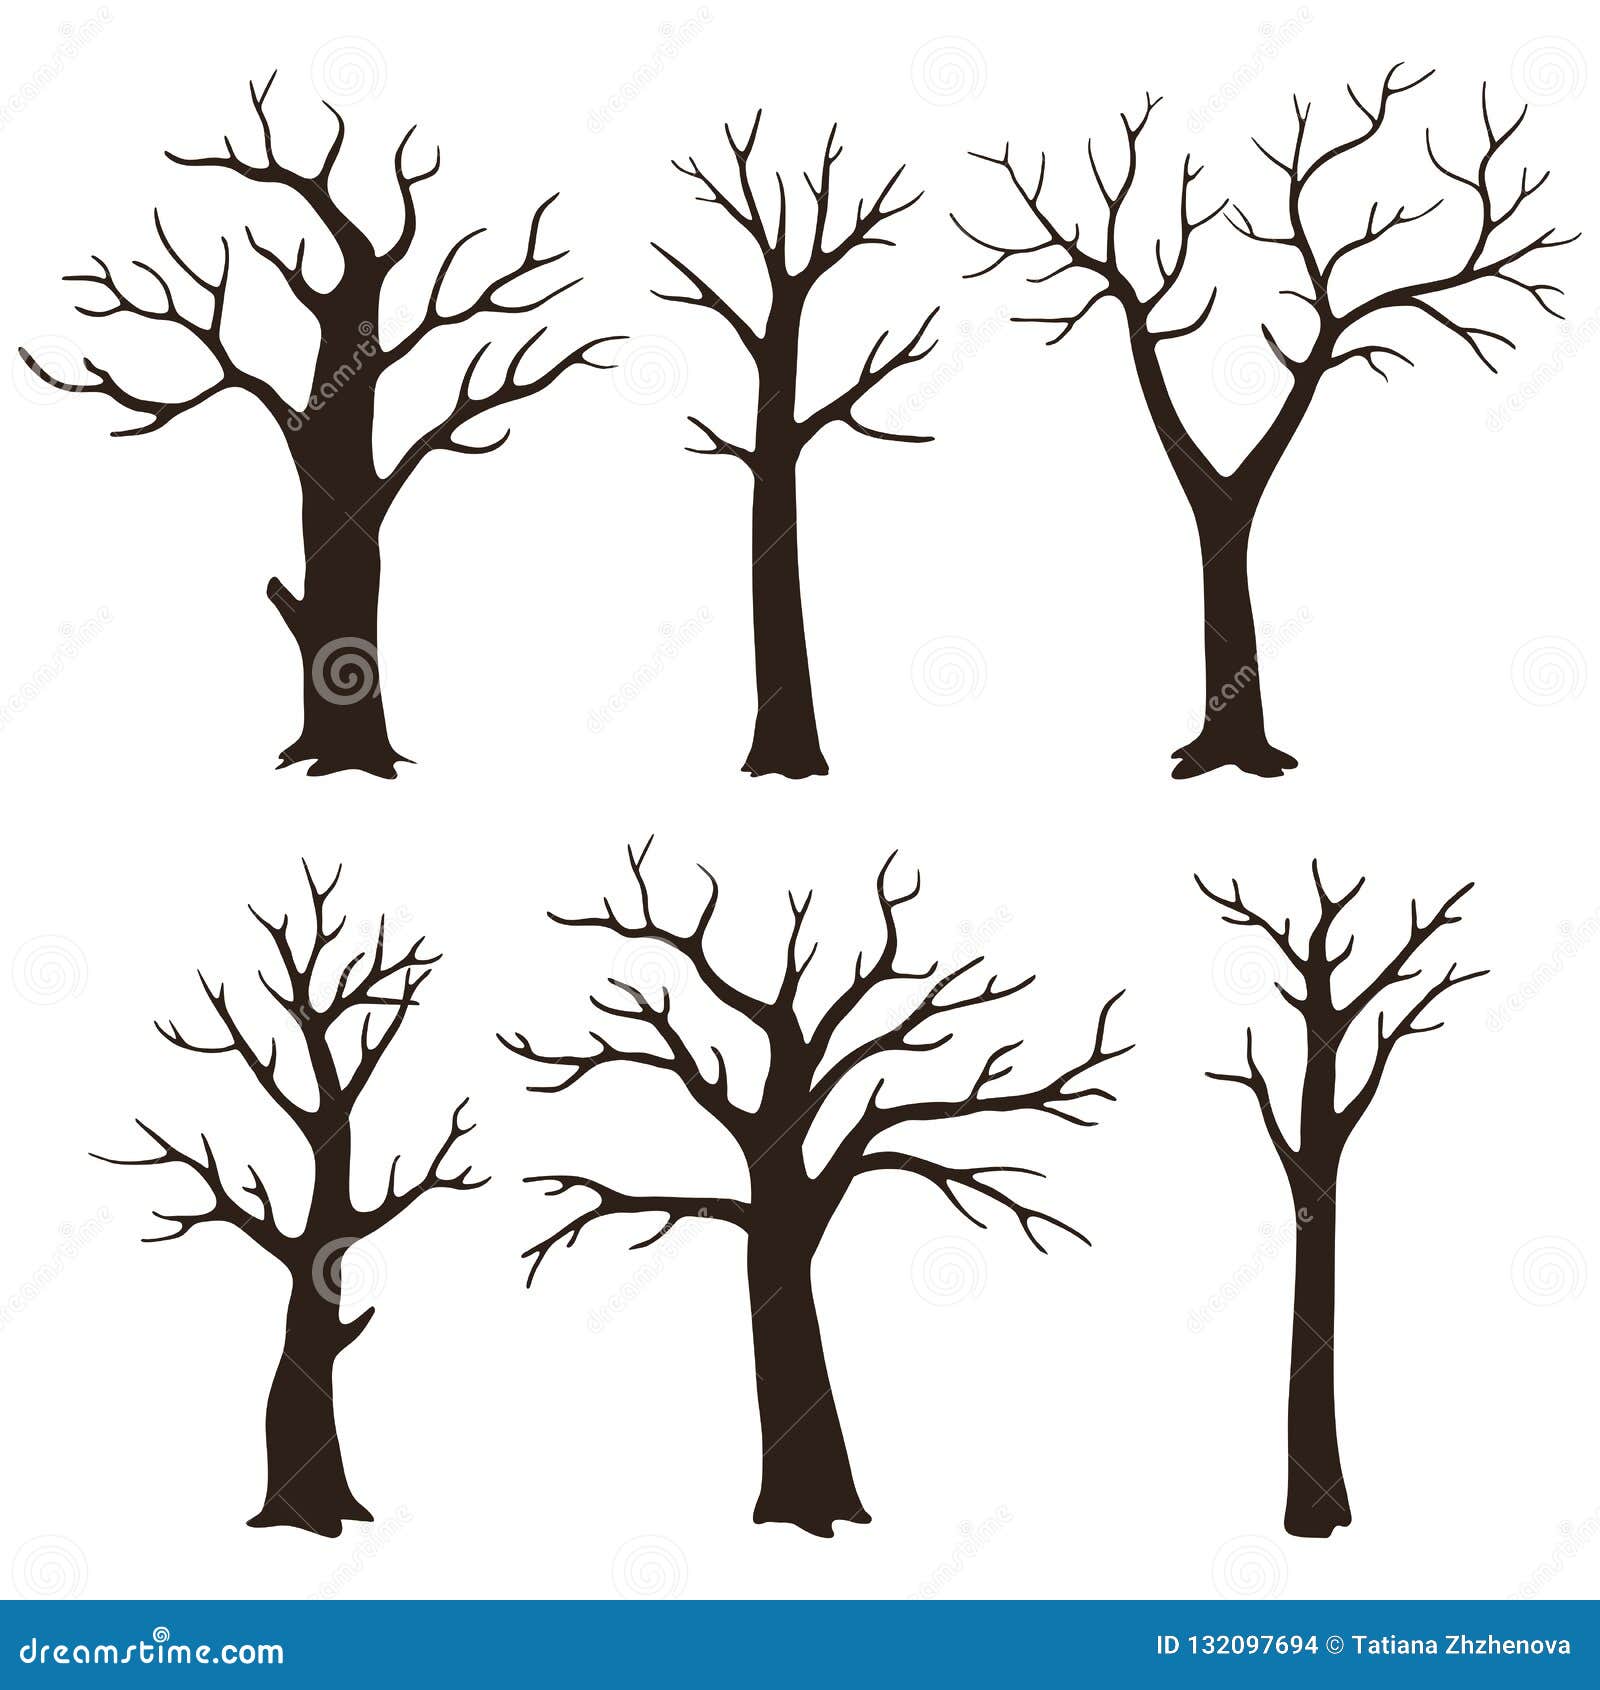 Set of Bare Tree Silhouettes with Leafless Branches Isolated on a White